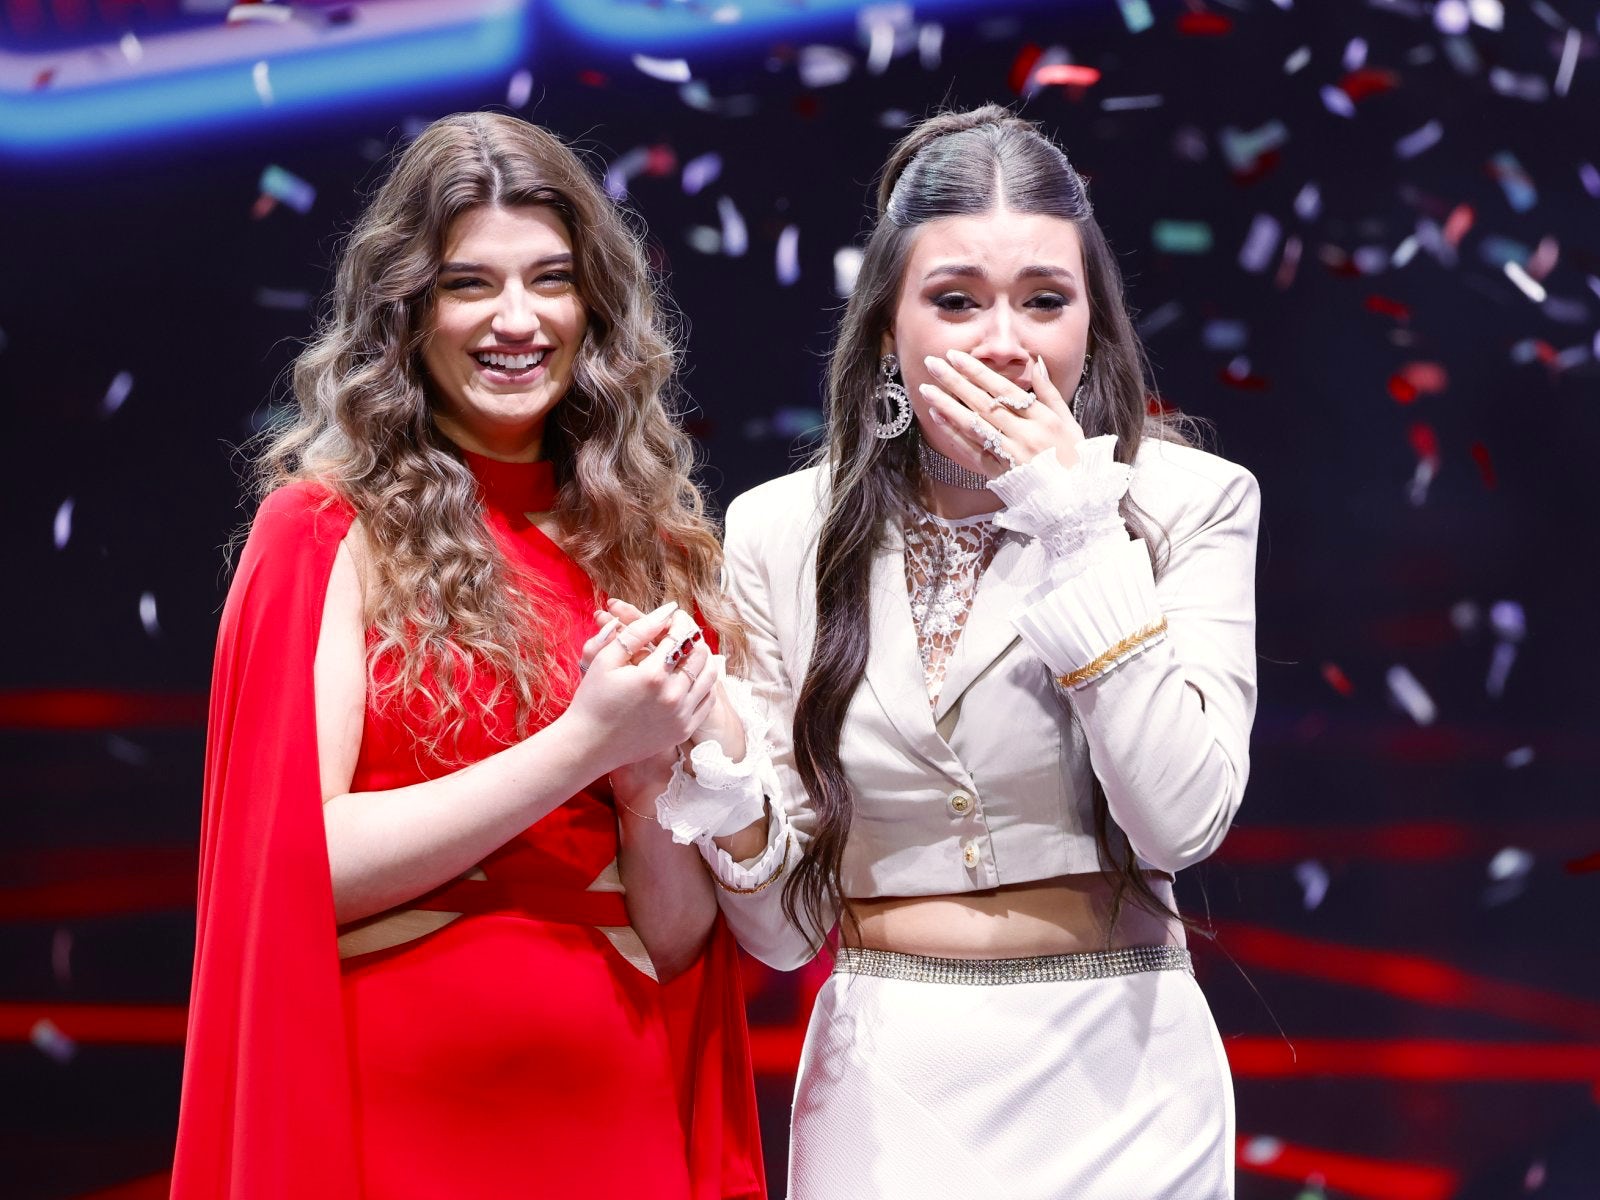 'The Voice' crowns Gina Miles winner of Season 23 over runnerup Grace